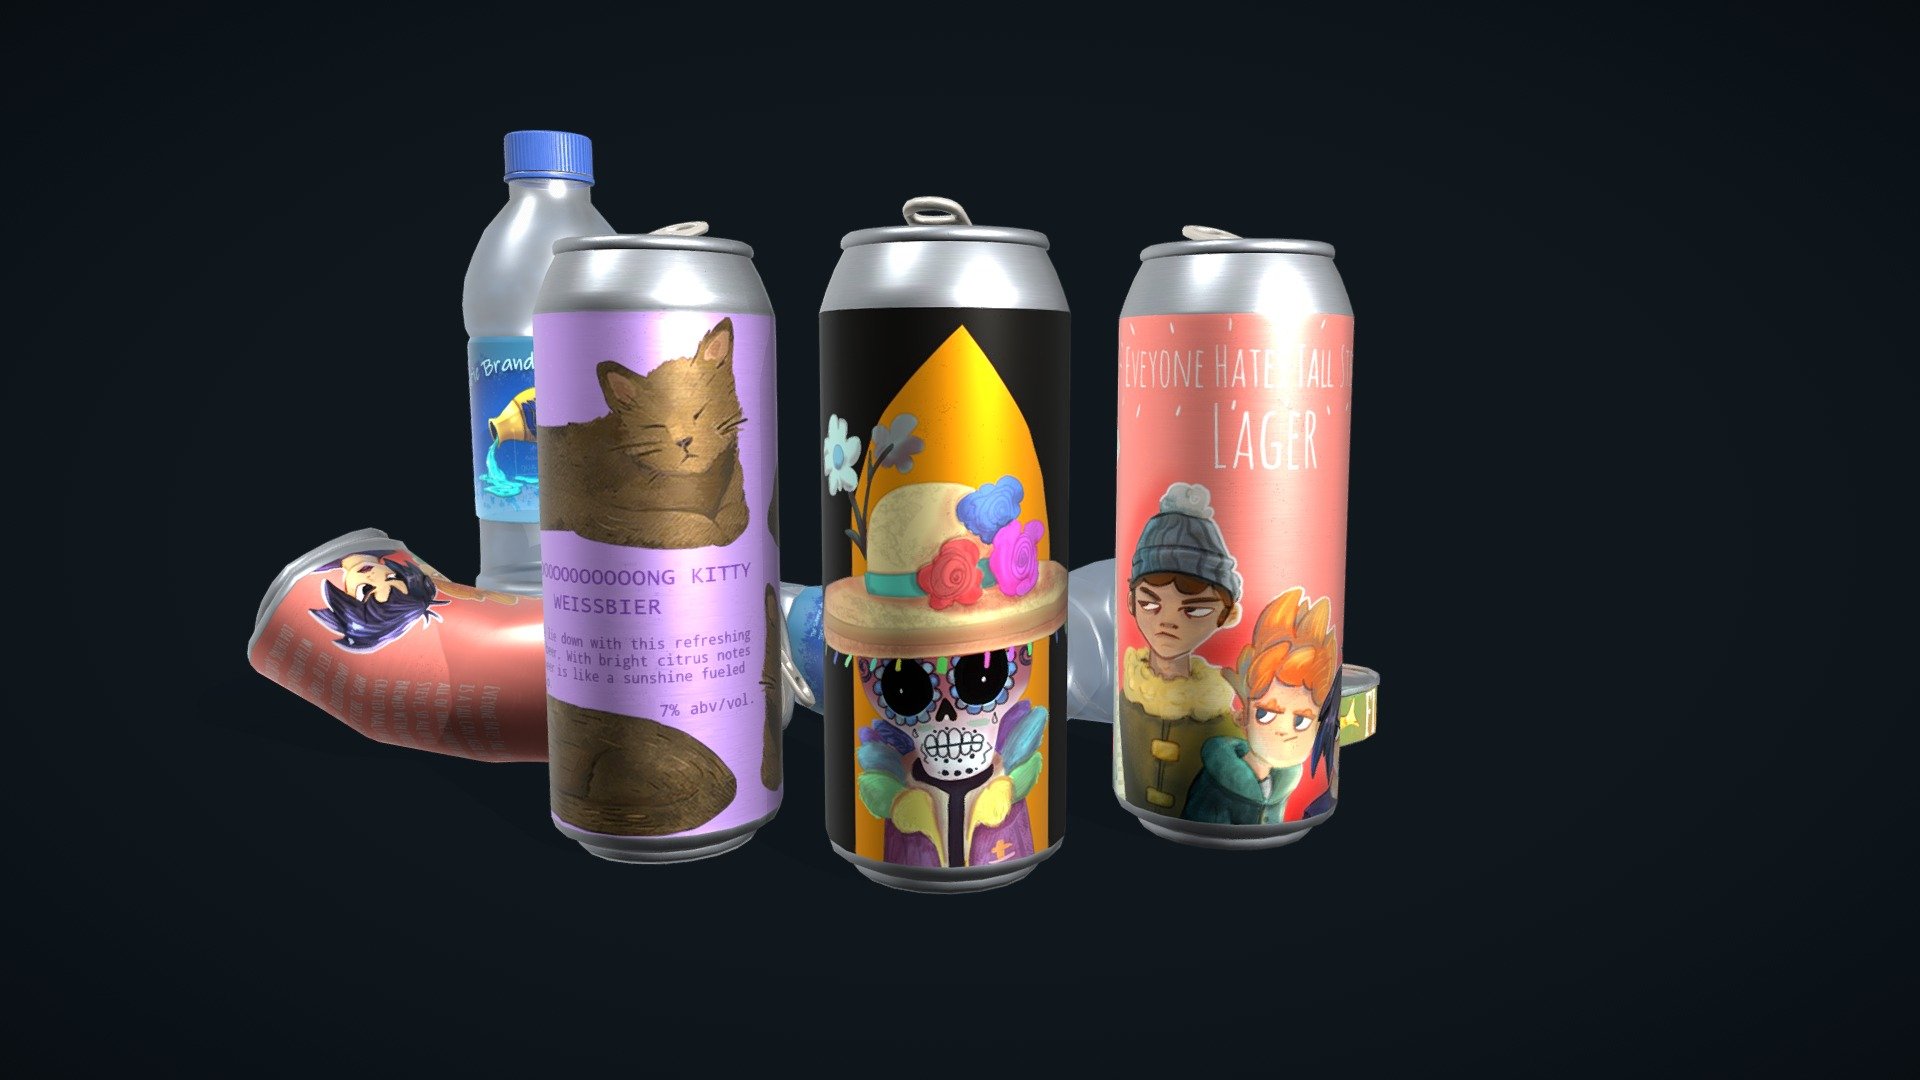 Remember to enjoy responsibly and recycle your cans! Models feature handpainted textures, labels and descriptions 3d model